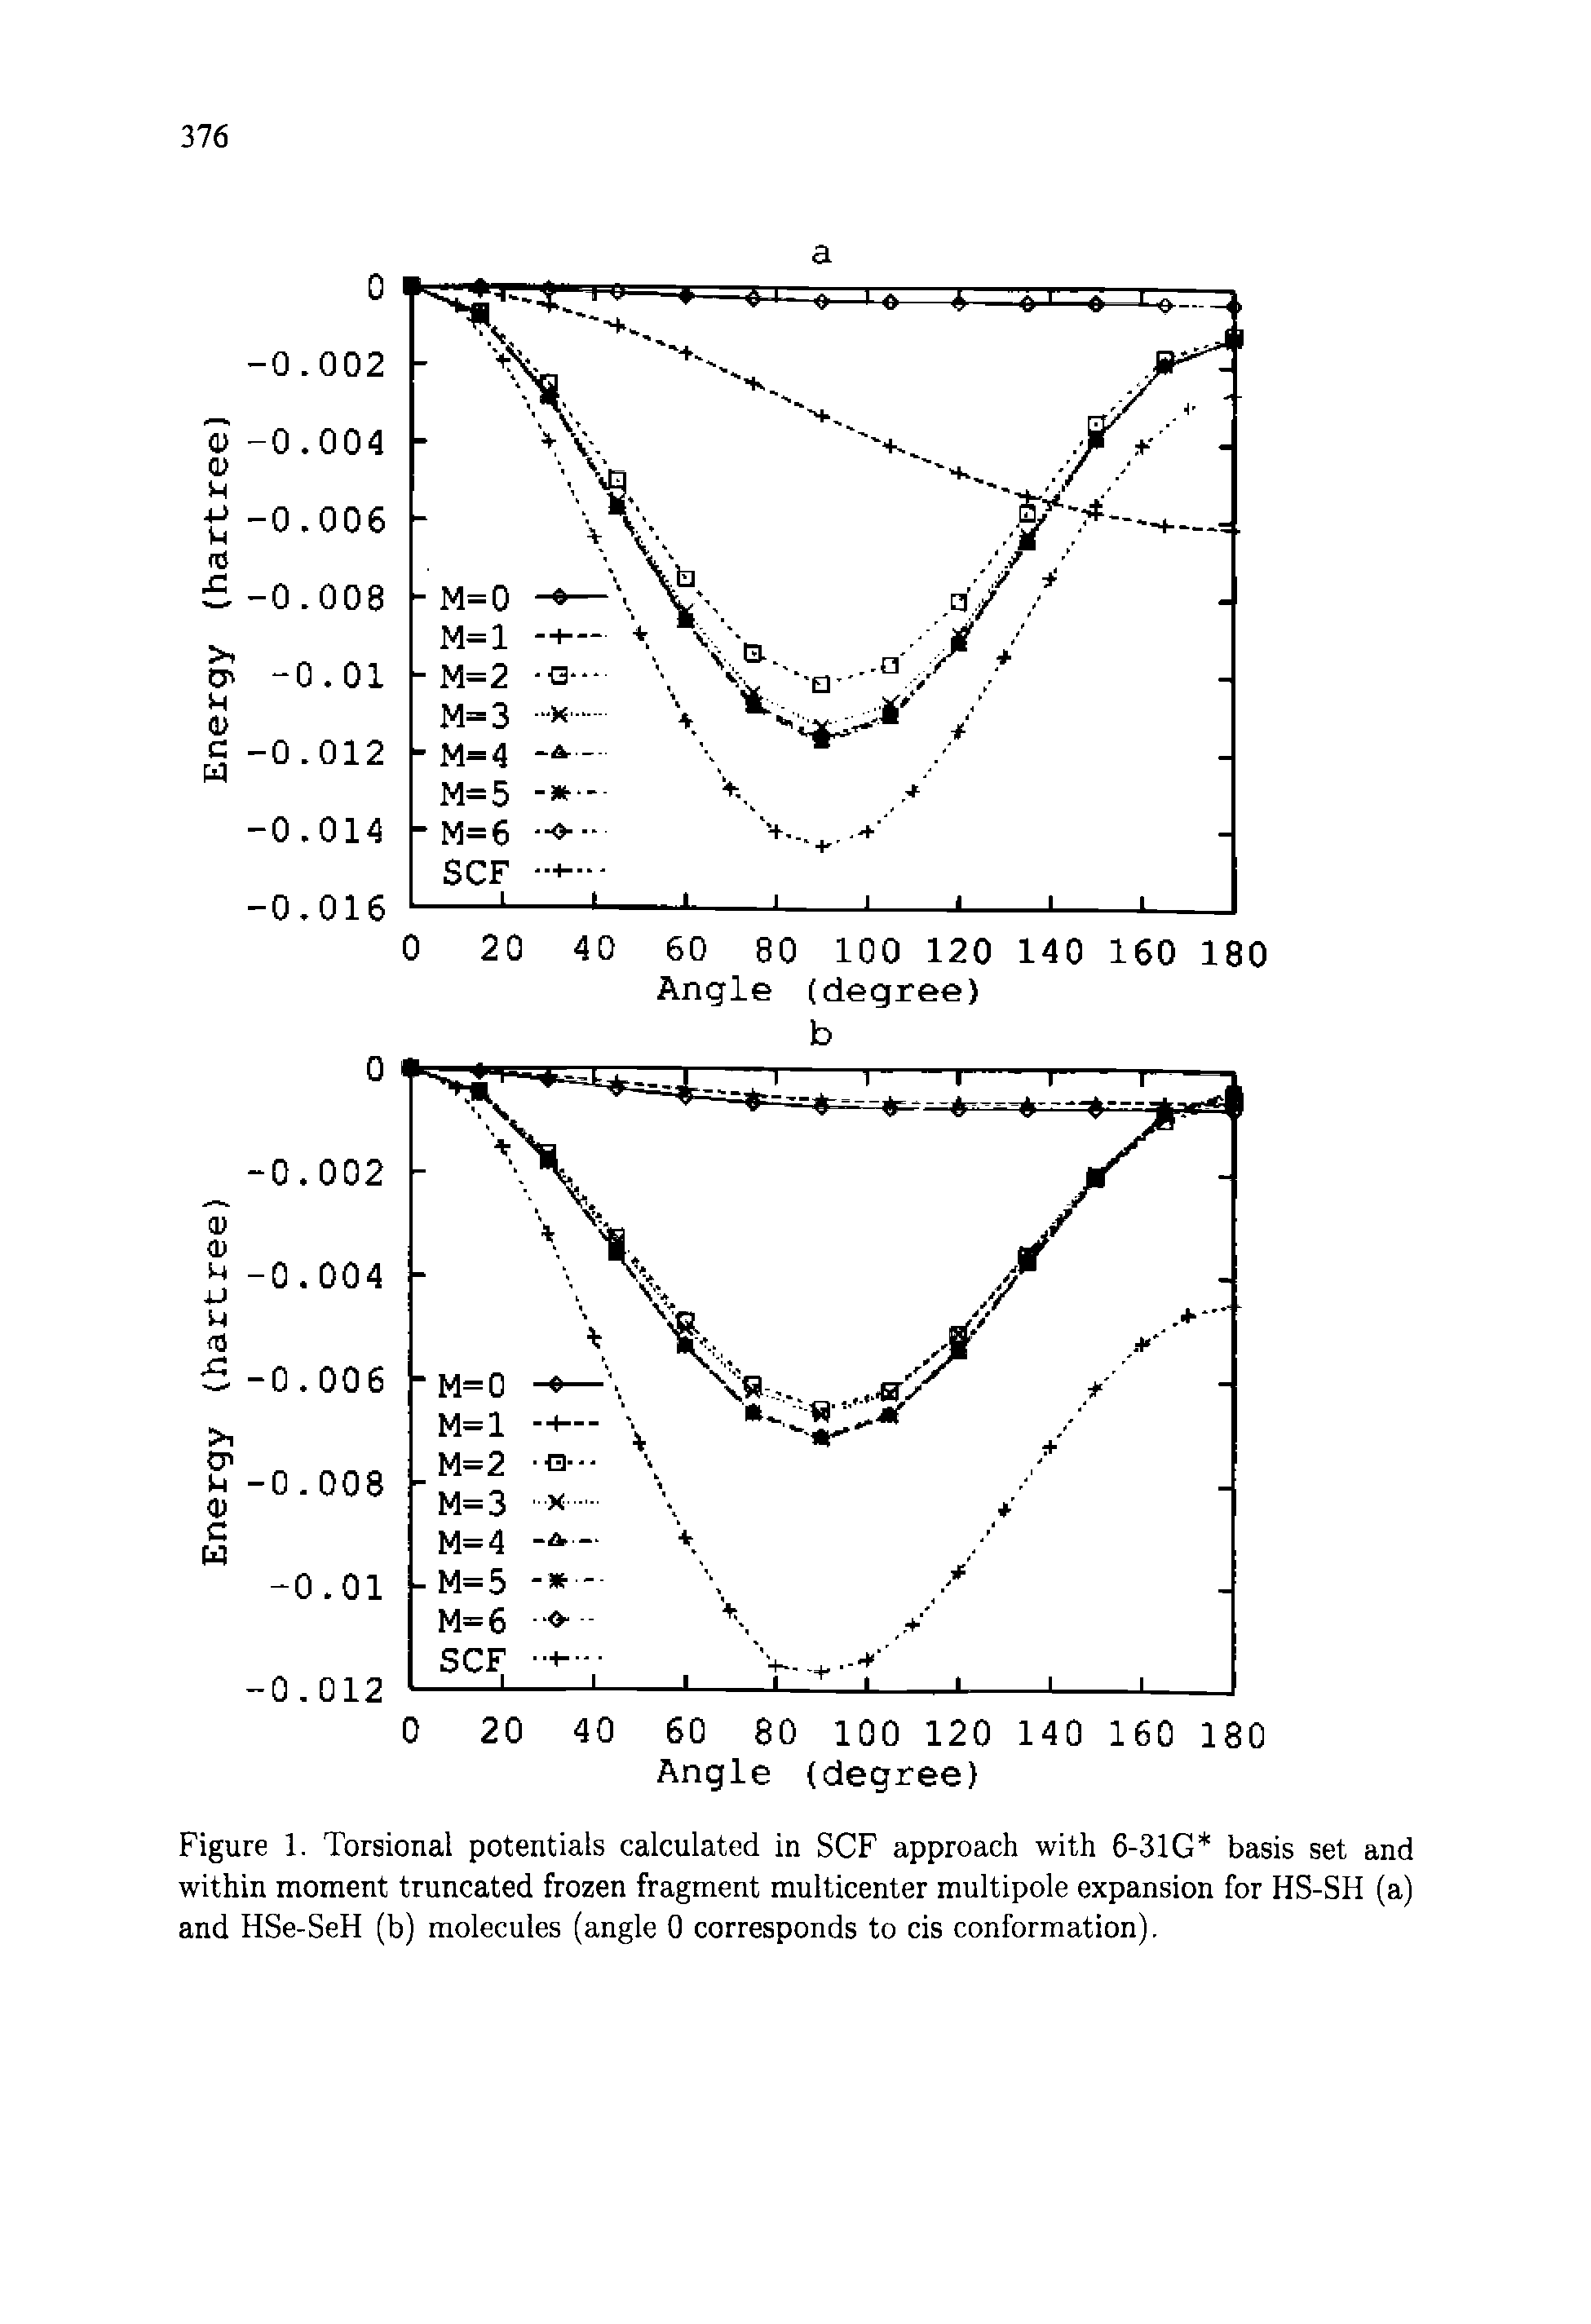 Figure 1. Torsional potentials calculated in SCF approach with 6-31G basis set and within moment truncated frozen fragment multicenter multipole expansion for HS-SH (a) and HSe-SeH (b) molecules (angle 0 corresponds to cis conformation).